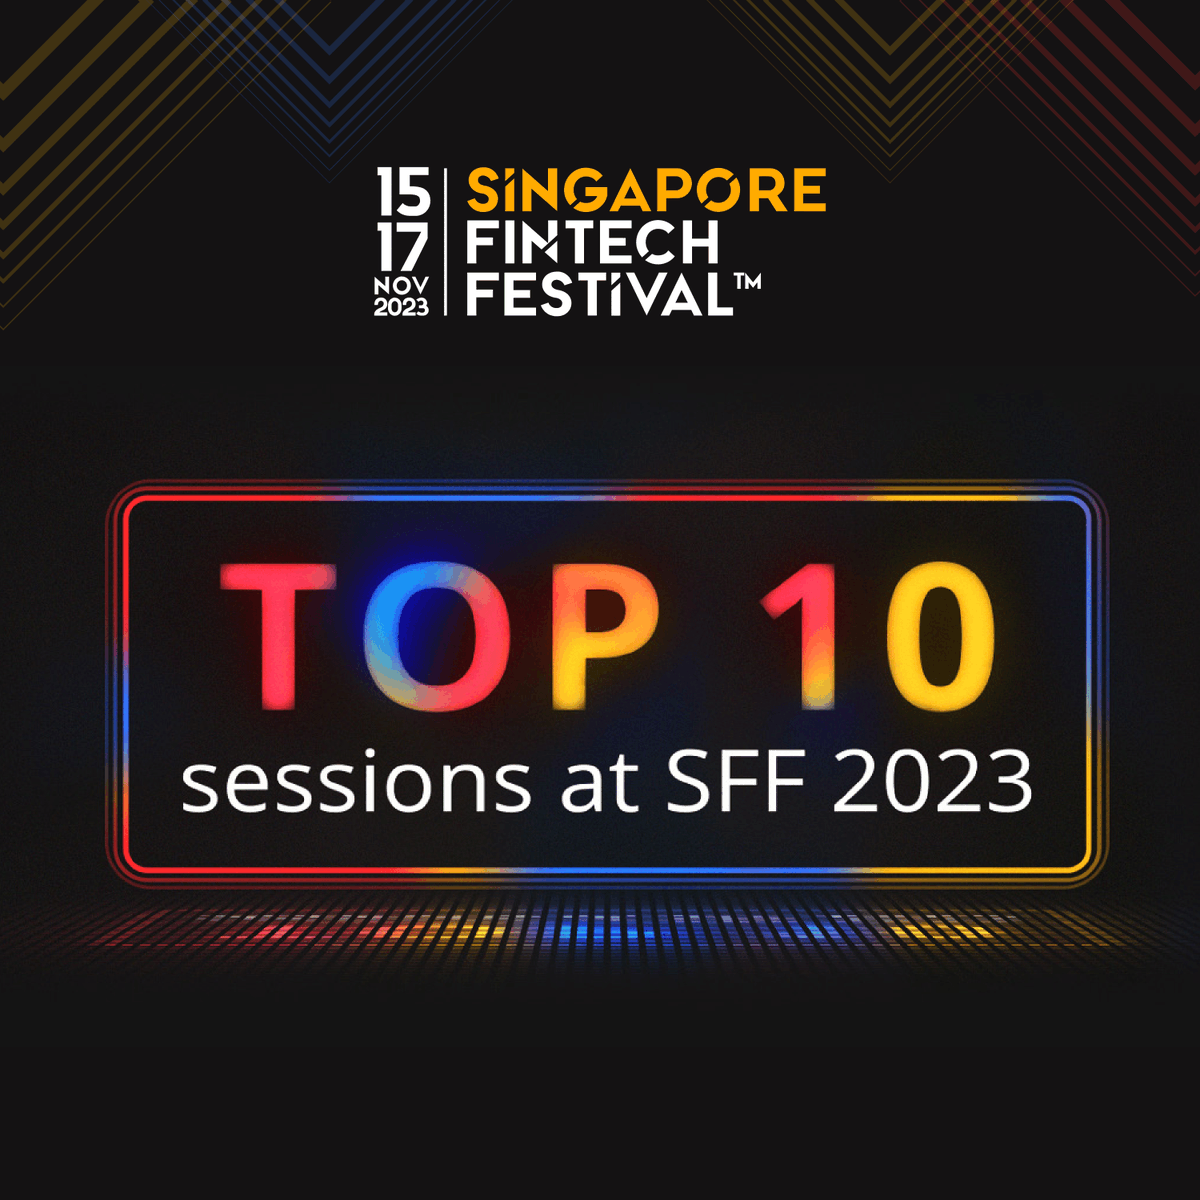 Guide to the Top 10 sessions #SFF2023 not to be missed! 

Open this thread to learn more about the rest of the Top 10 sessions this year! 

#SFF2023 #FinTech #Stablecoins #TokenisedDeposits #Blockchain #DigitalAssets #DigitalMoney #AI